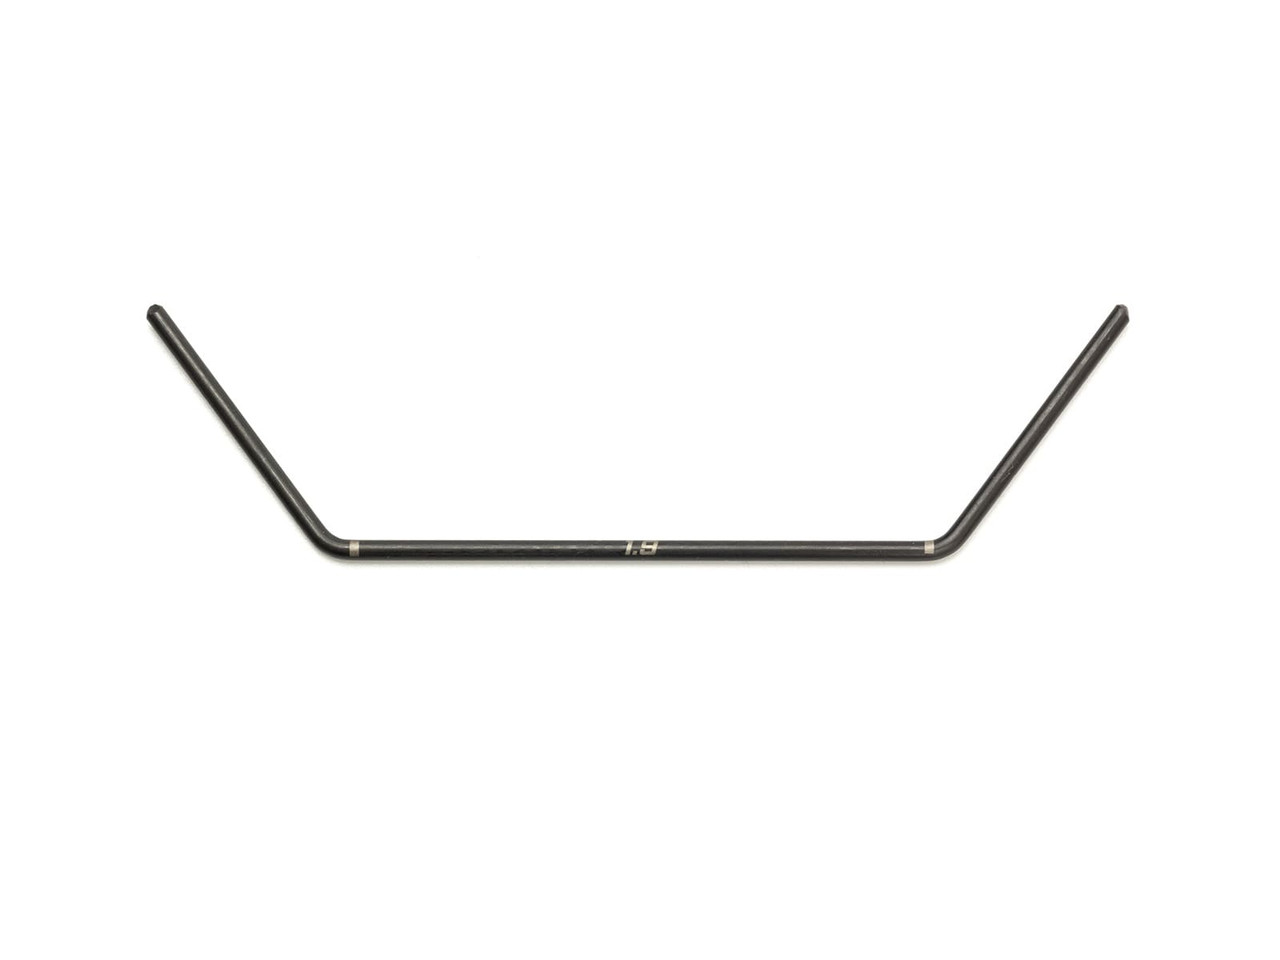 G201 - FRONT SWAY BAR 1.9MM (IF15-2)